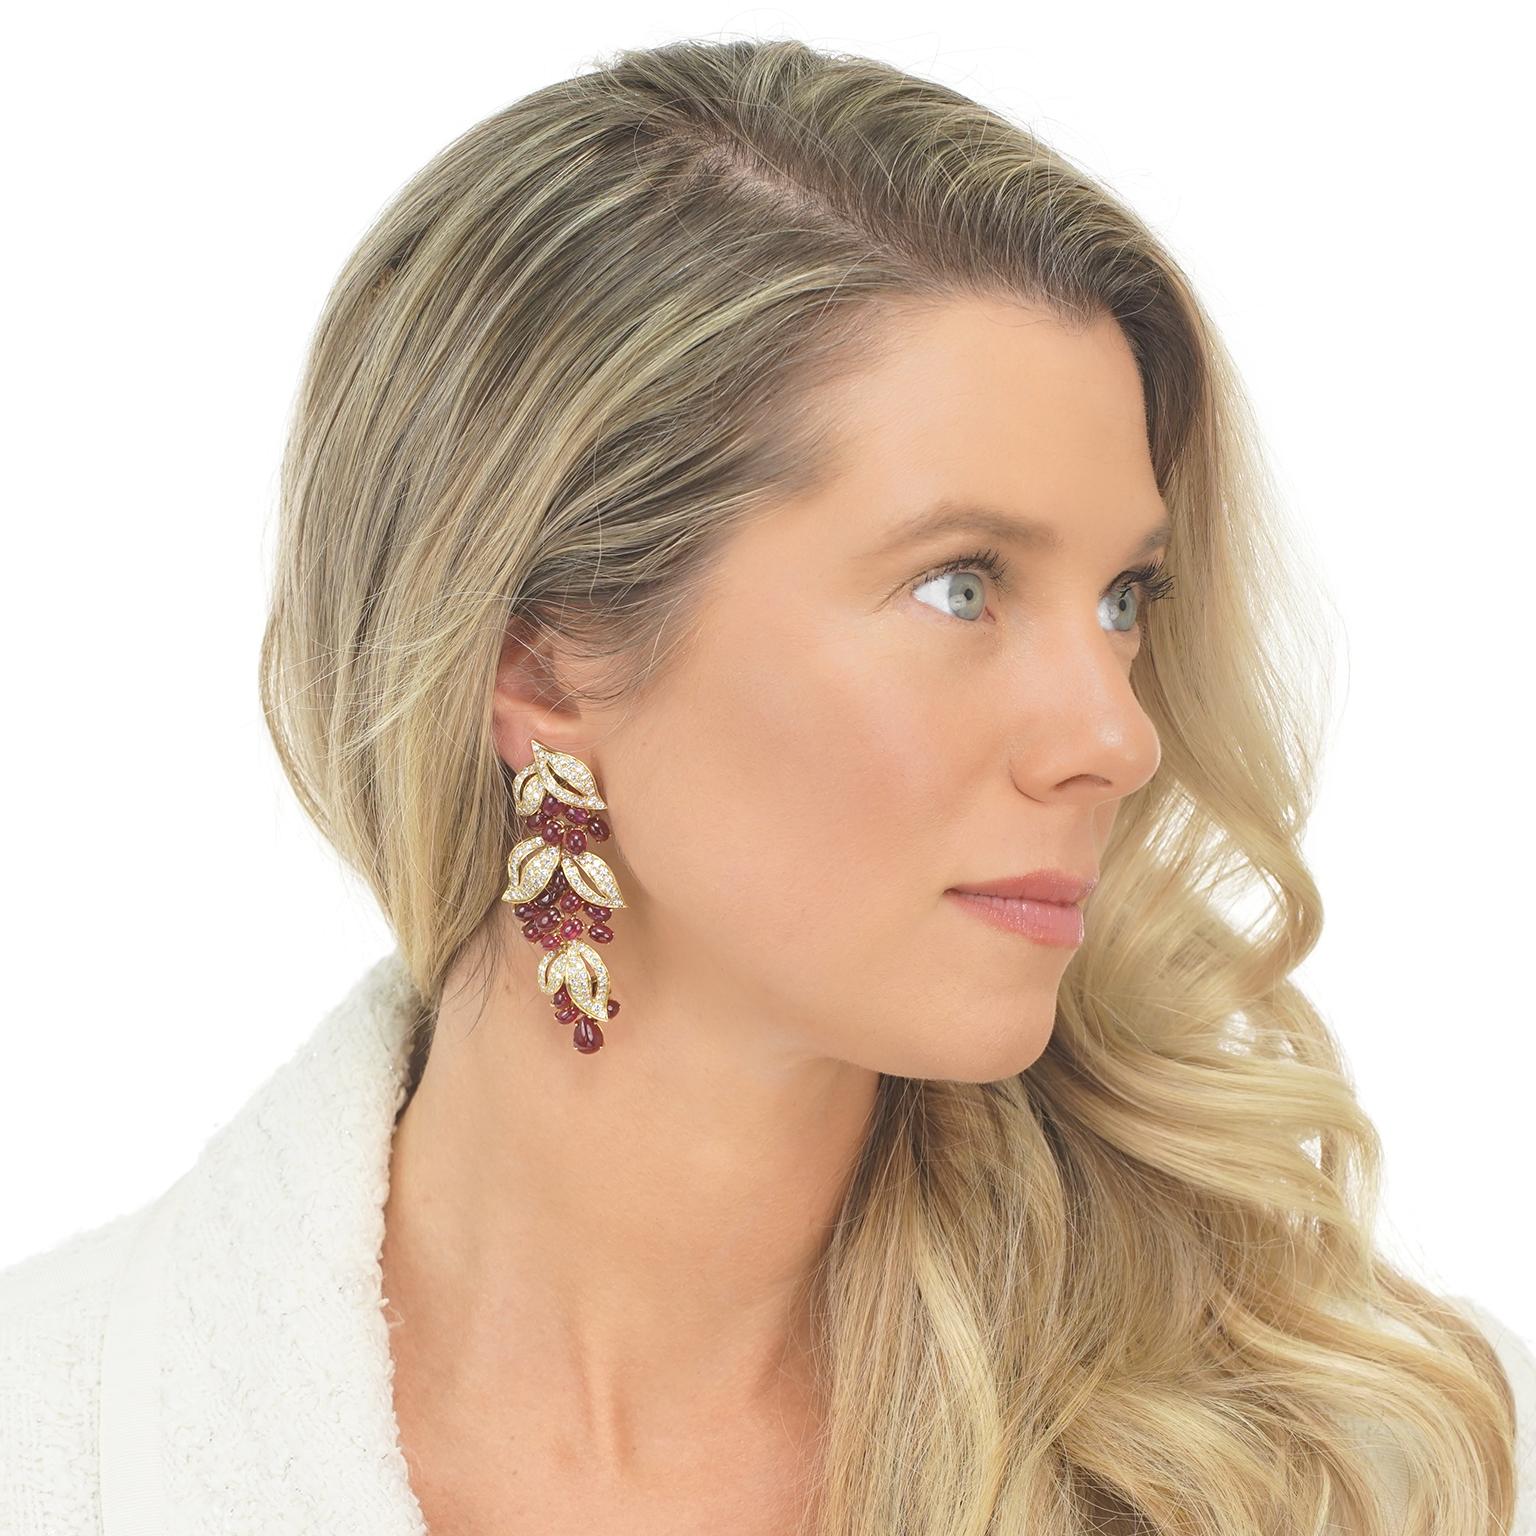 Circa 1970s, 18k, by Adler, Geneva, Switzerland.  These breathtaking earrings by Adler of Geneva feature an elegant organic landscape festooned with rubies and diamonds. Lush berries hang from glittering diamond-set gold leaves in this dazzlingly